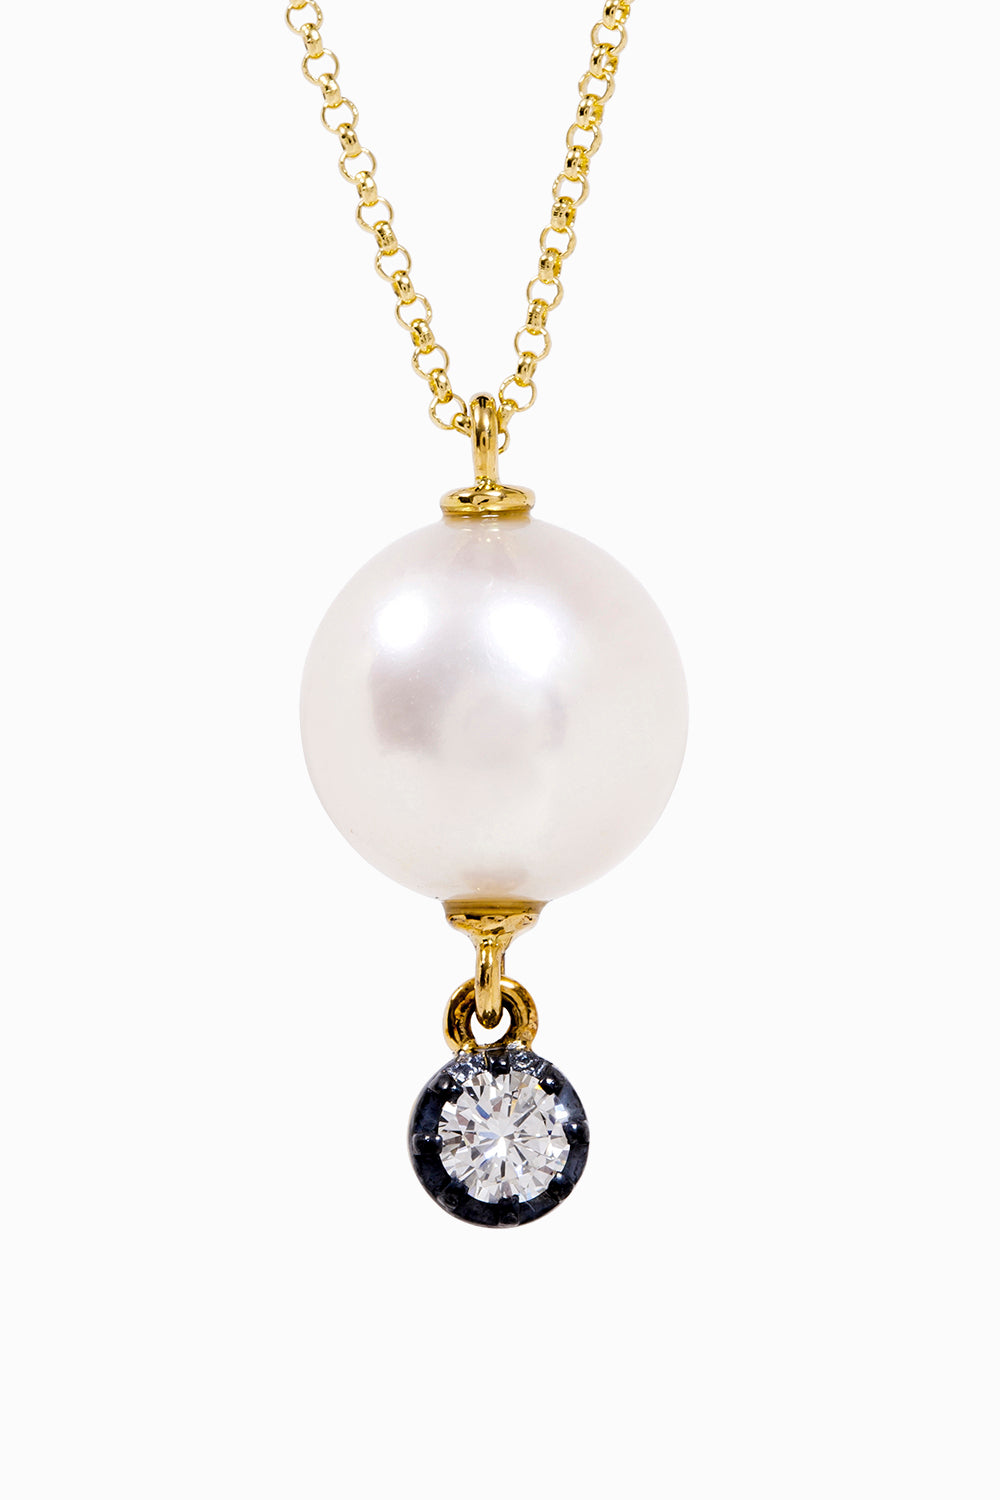 Pearl and diamond pendant necklace